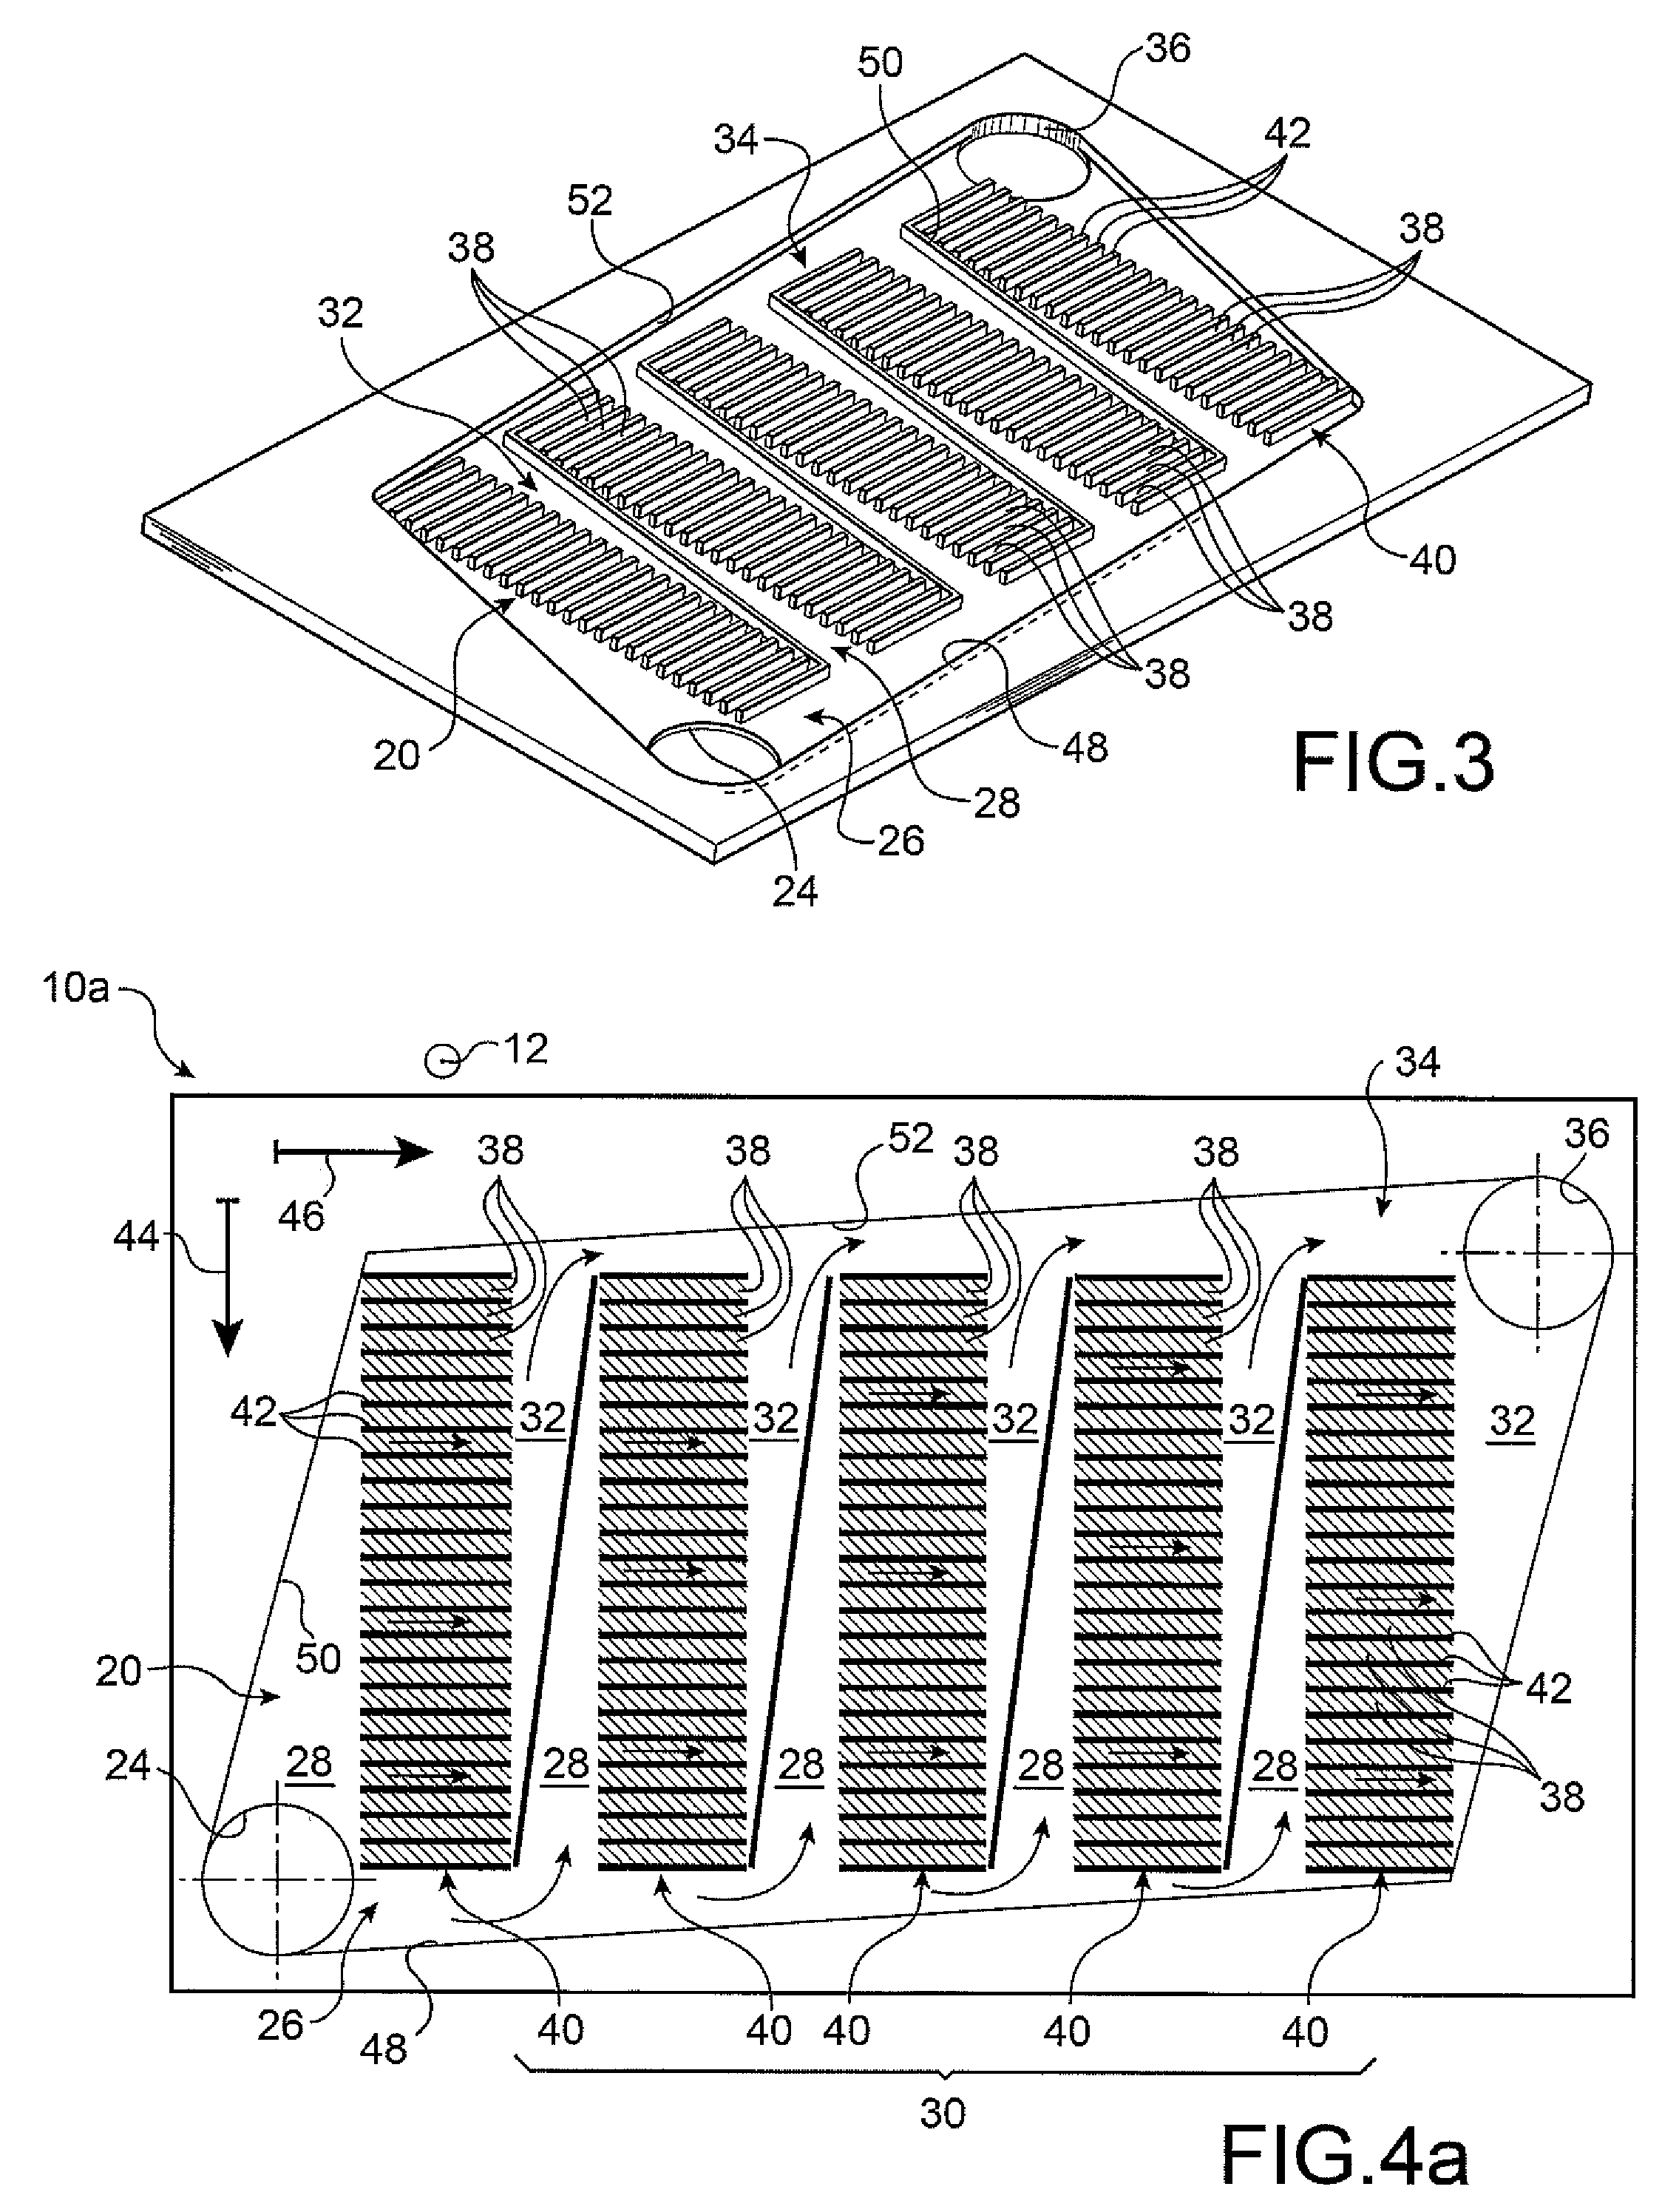 Heat exchanger system comprising fluid circulation zones which are selectively coated with a chemical reaction catalyst